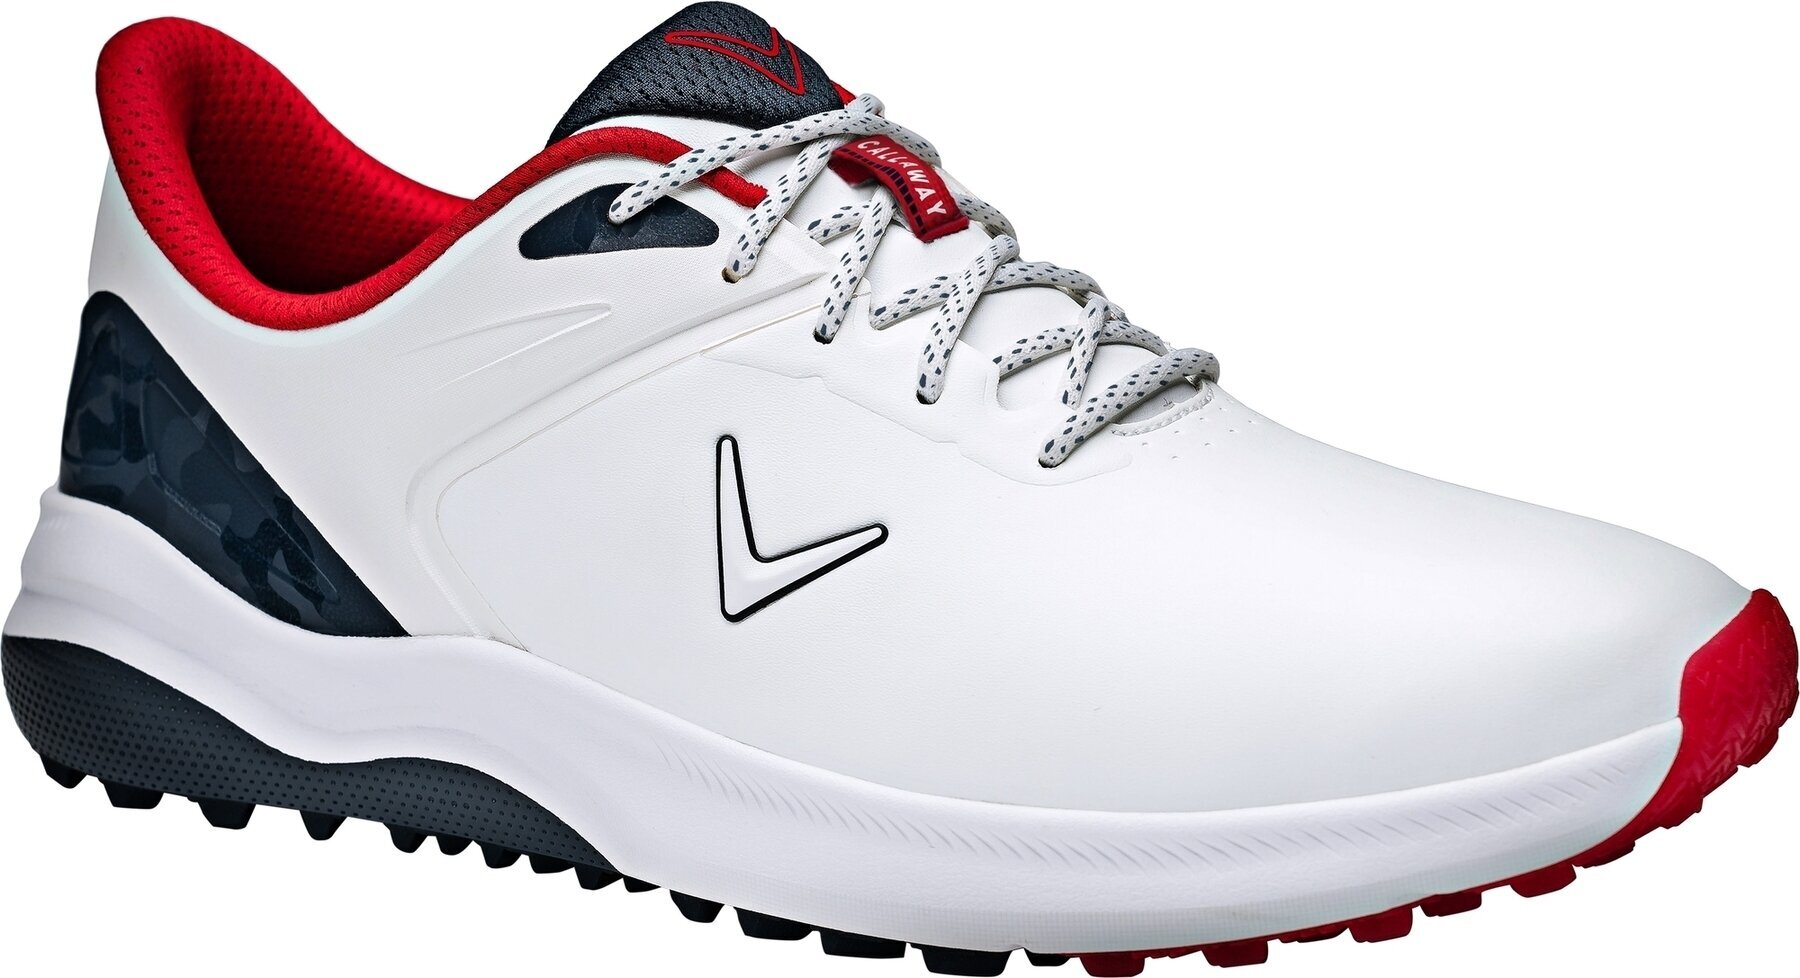 Chaussures de golf pour hommes Callaway Lazer Mens Golf Shoes White/Navy/Red 42